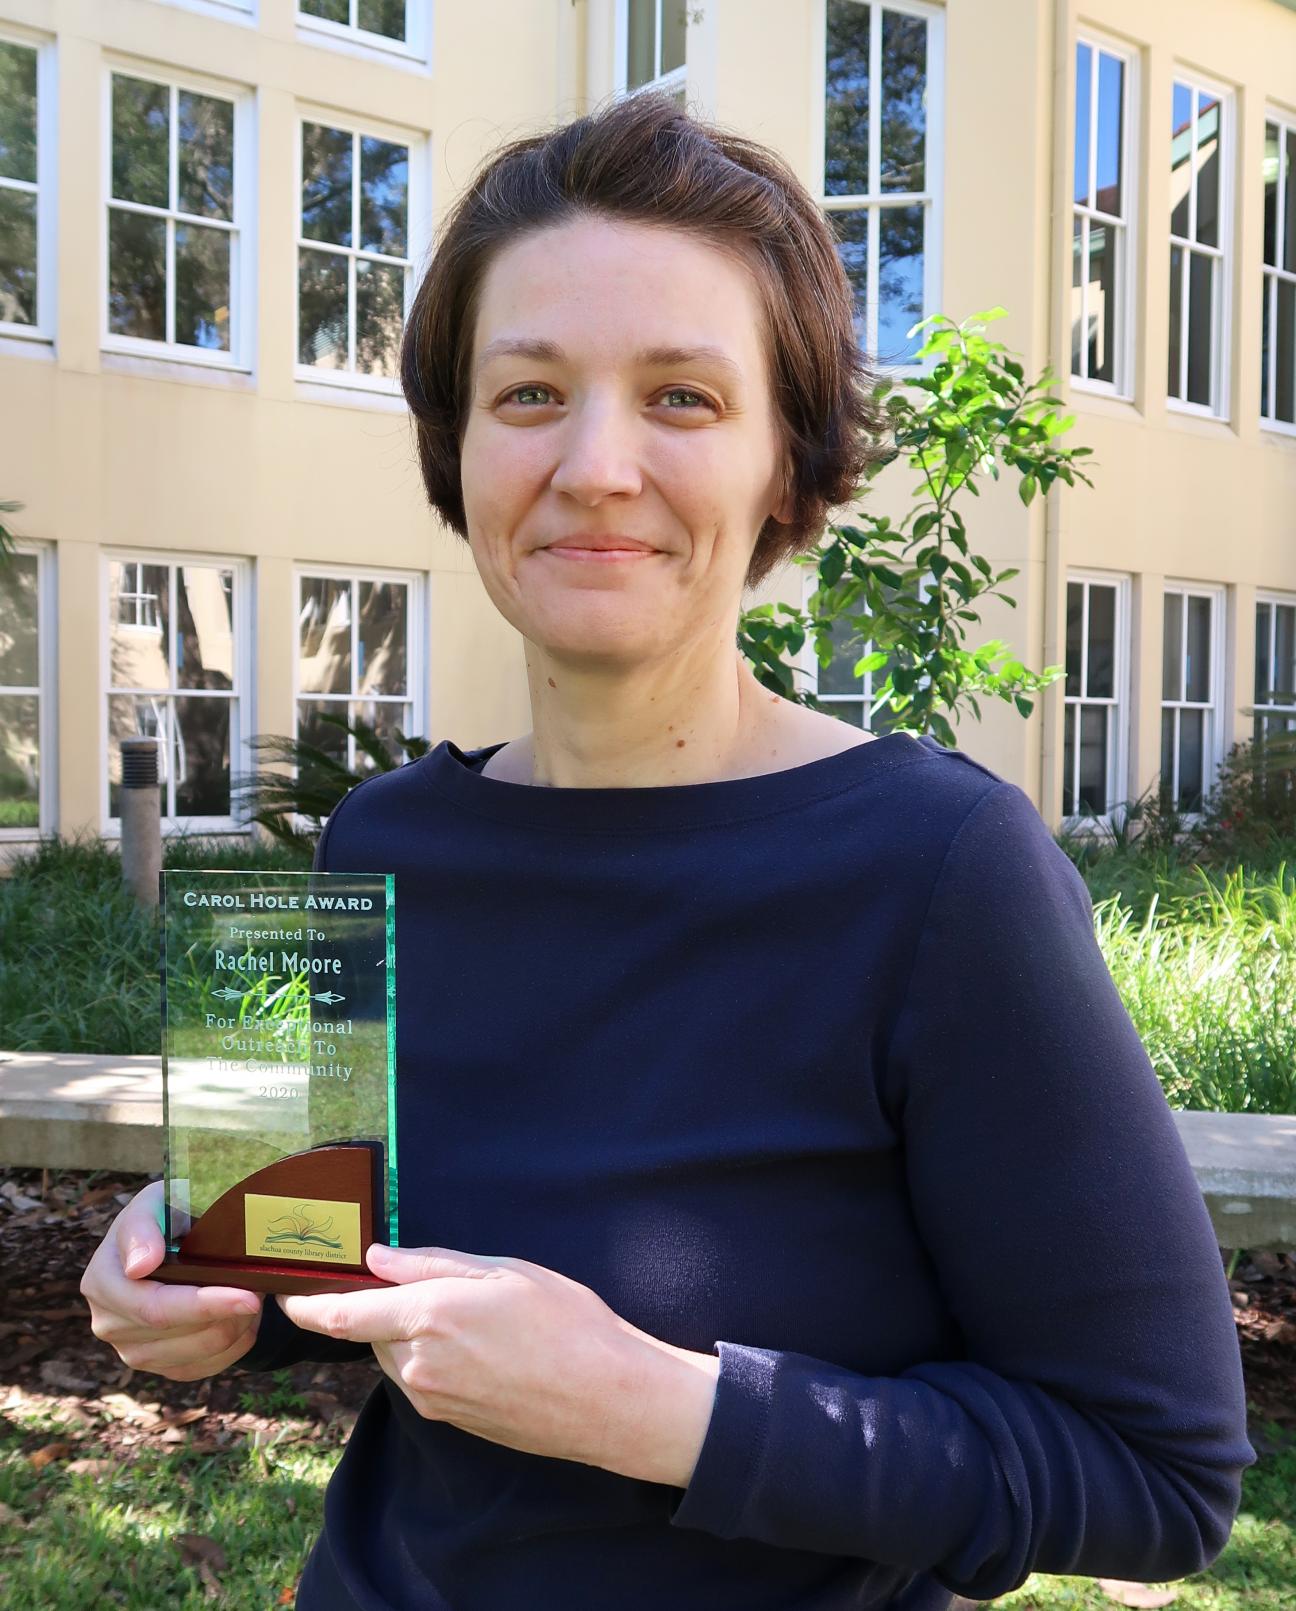 Librarian Rachel Moore holding a glass trophy for the Carol Hole Award.